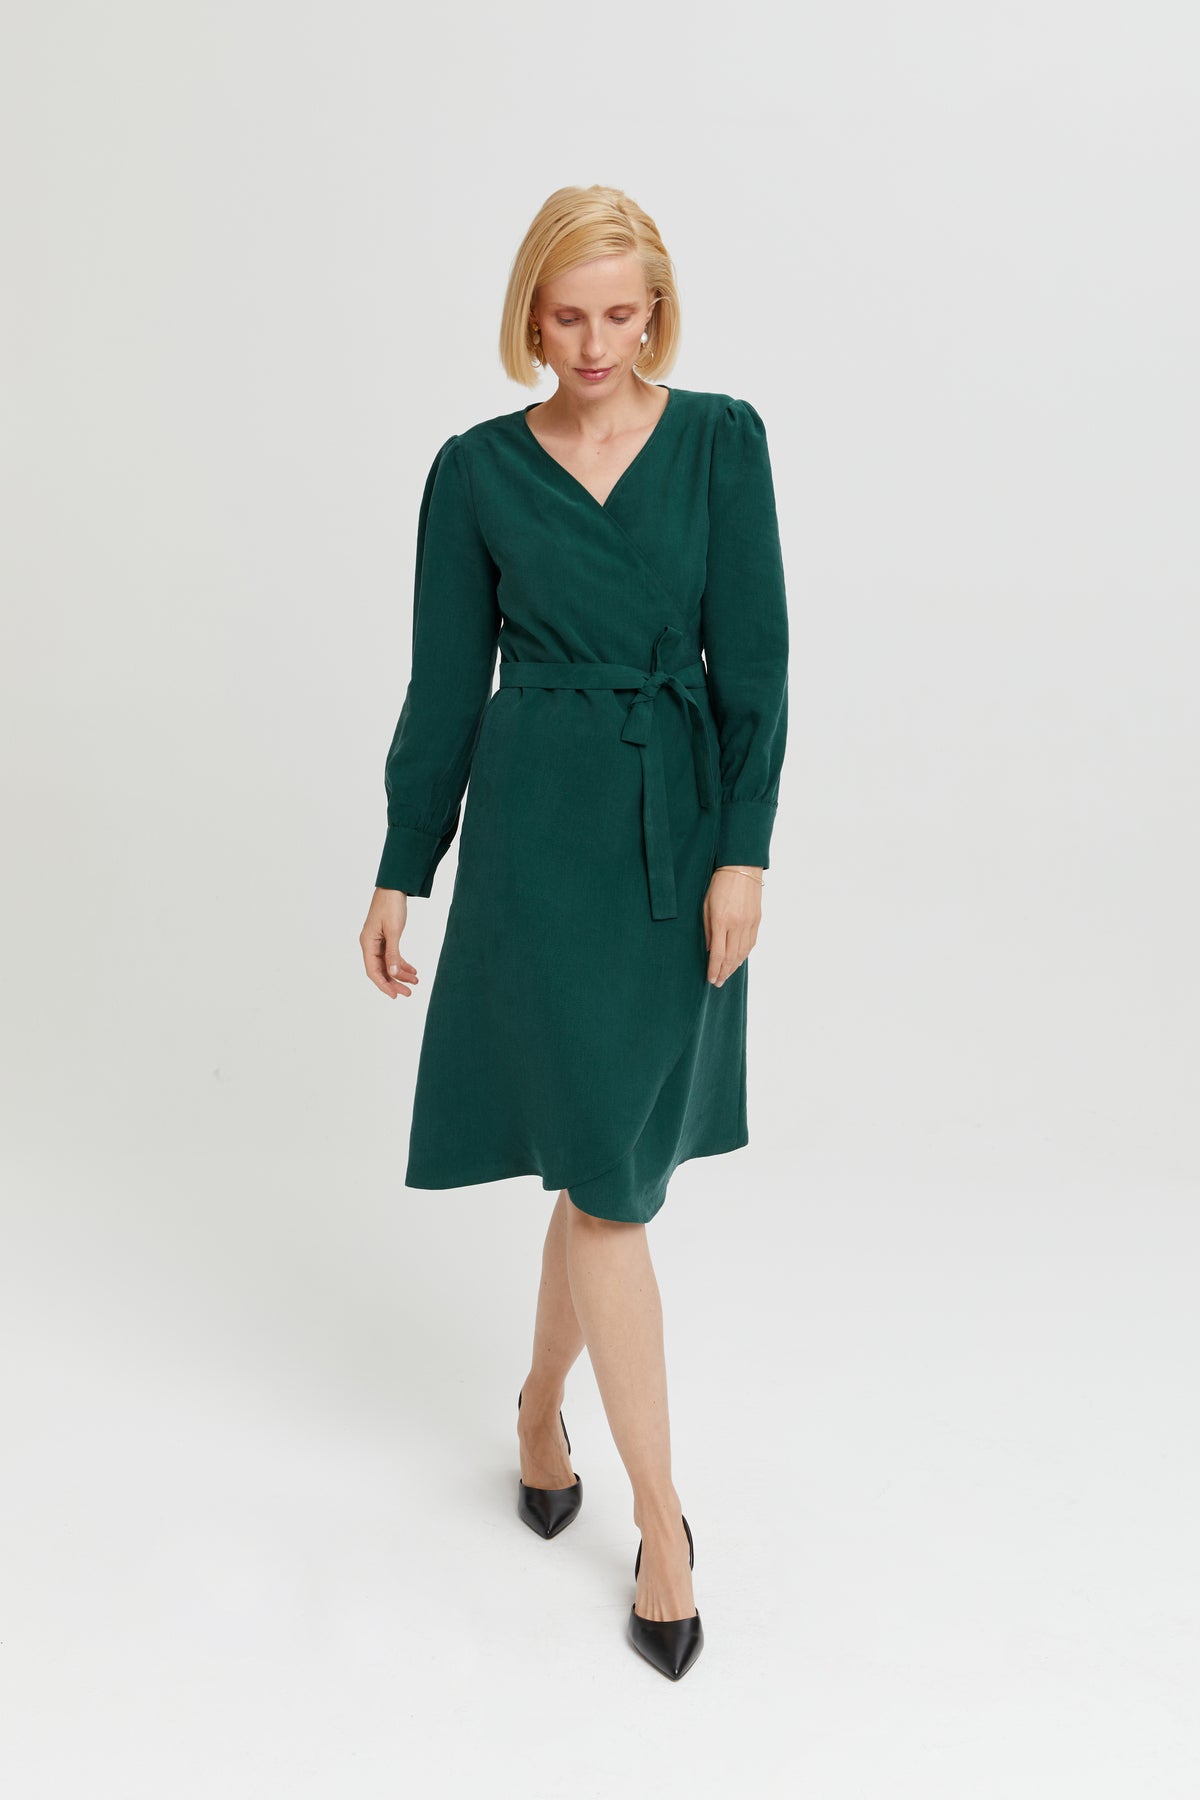 Sophie | Elegant wrap dress with puff sleeves and tie belt in dark blue by Ayani